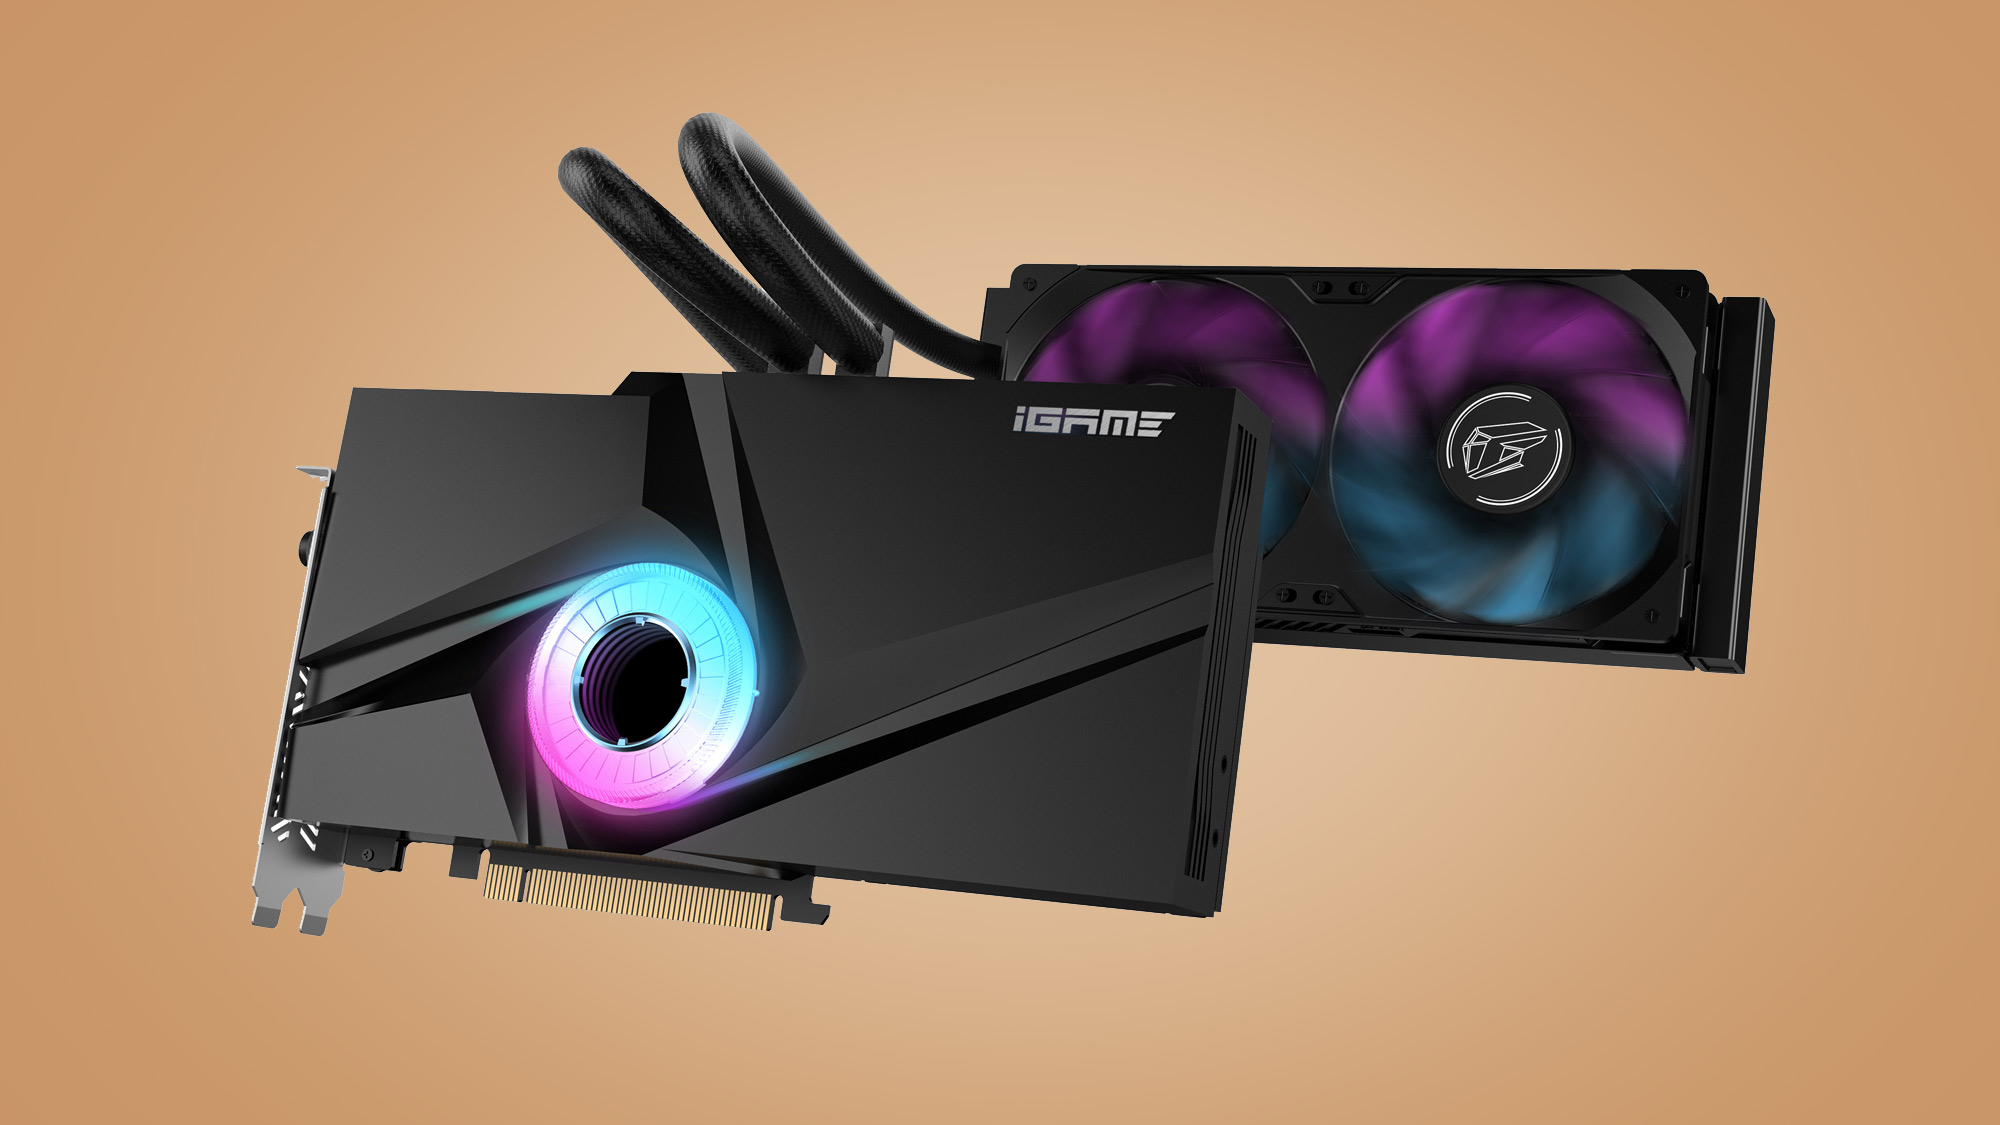 Colorful Introduces Powerful Rtx 3090 Ti Gpus For Gamers And Content Creators